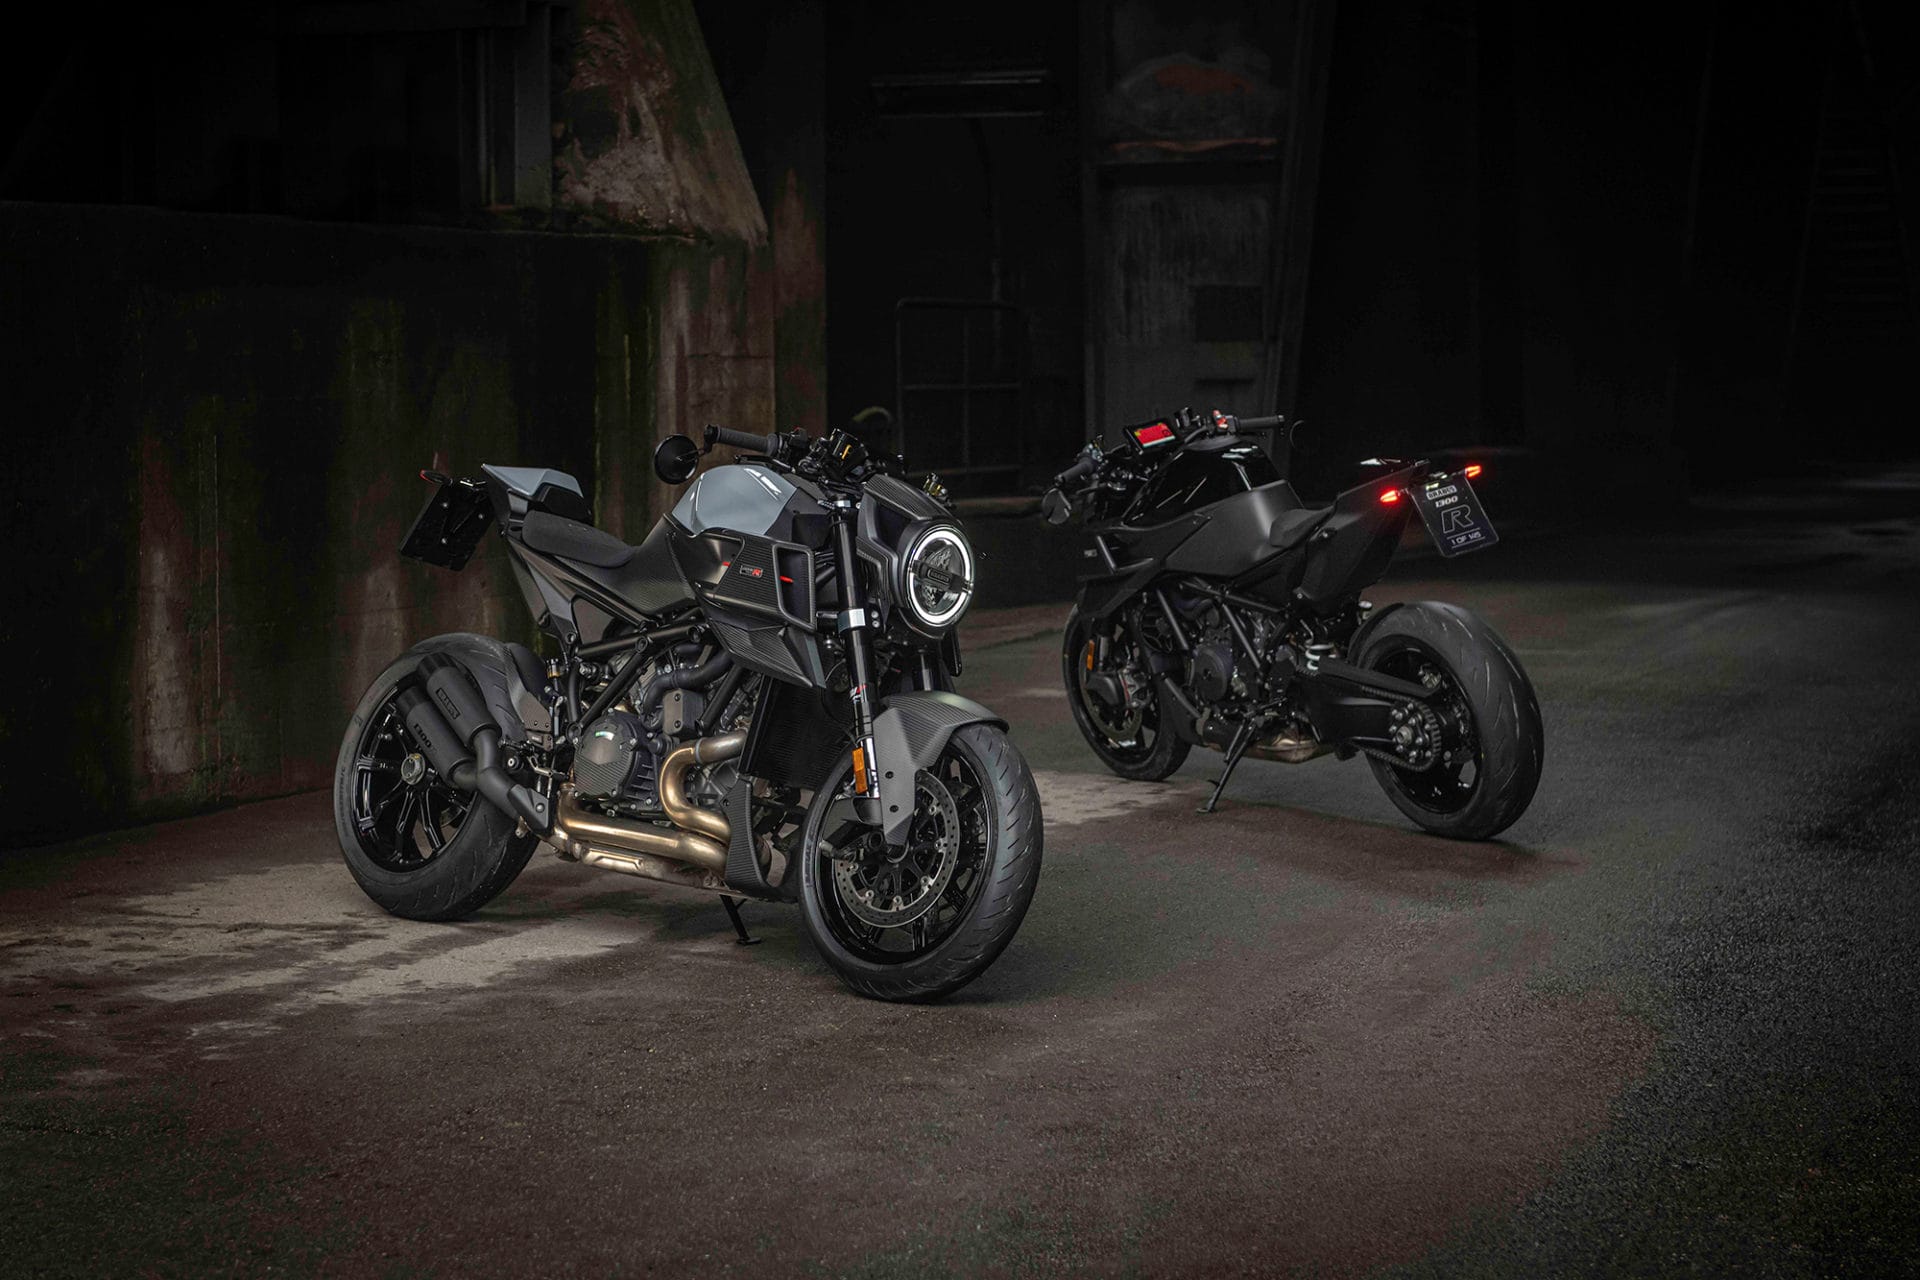 KTM and BRABUS unite once again: The limited BRABUS 1300 R Edition 23 – The ultimate naked bike experience